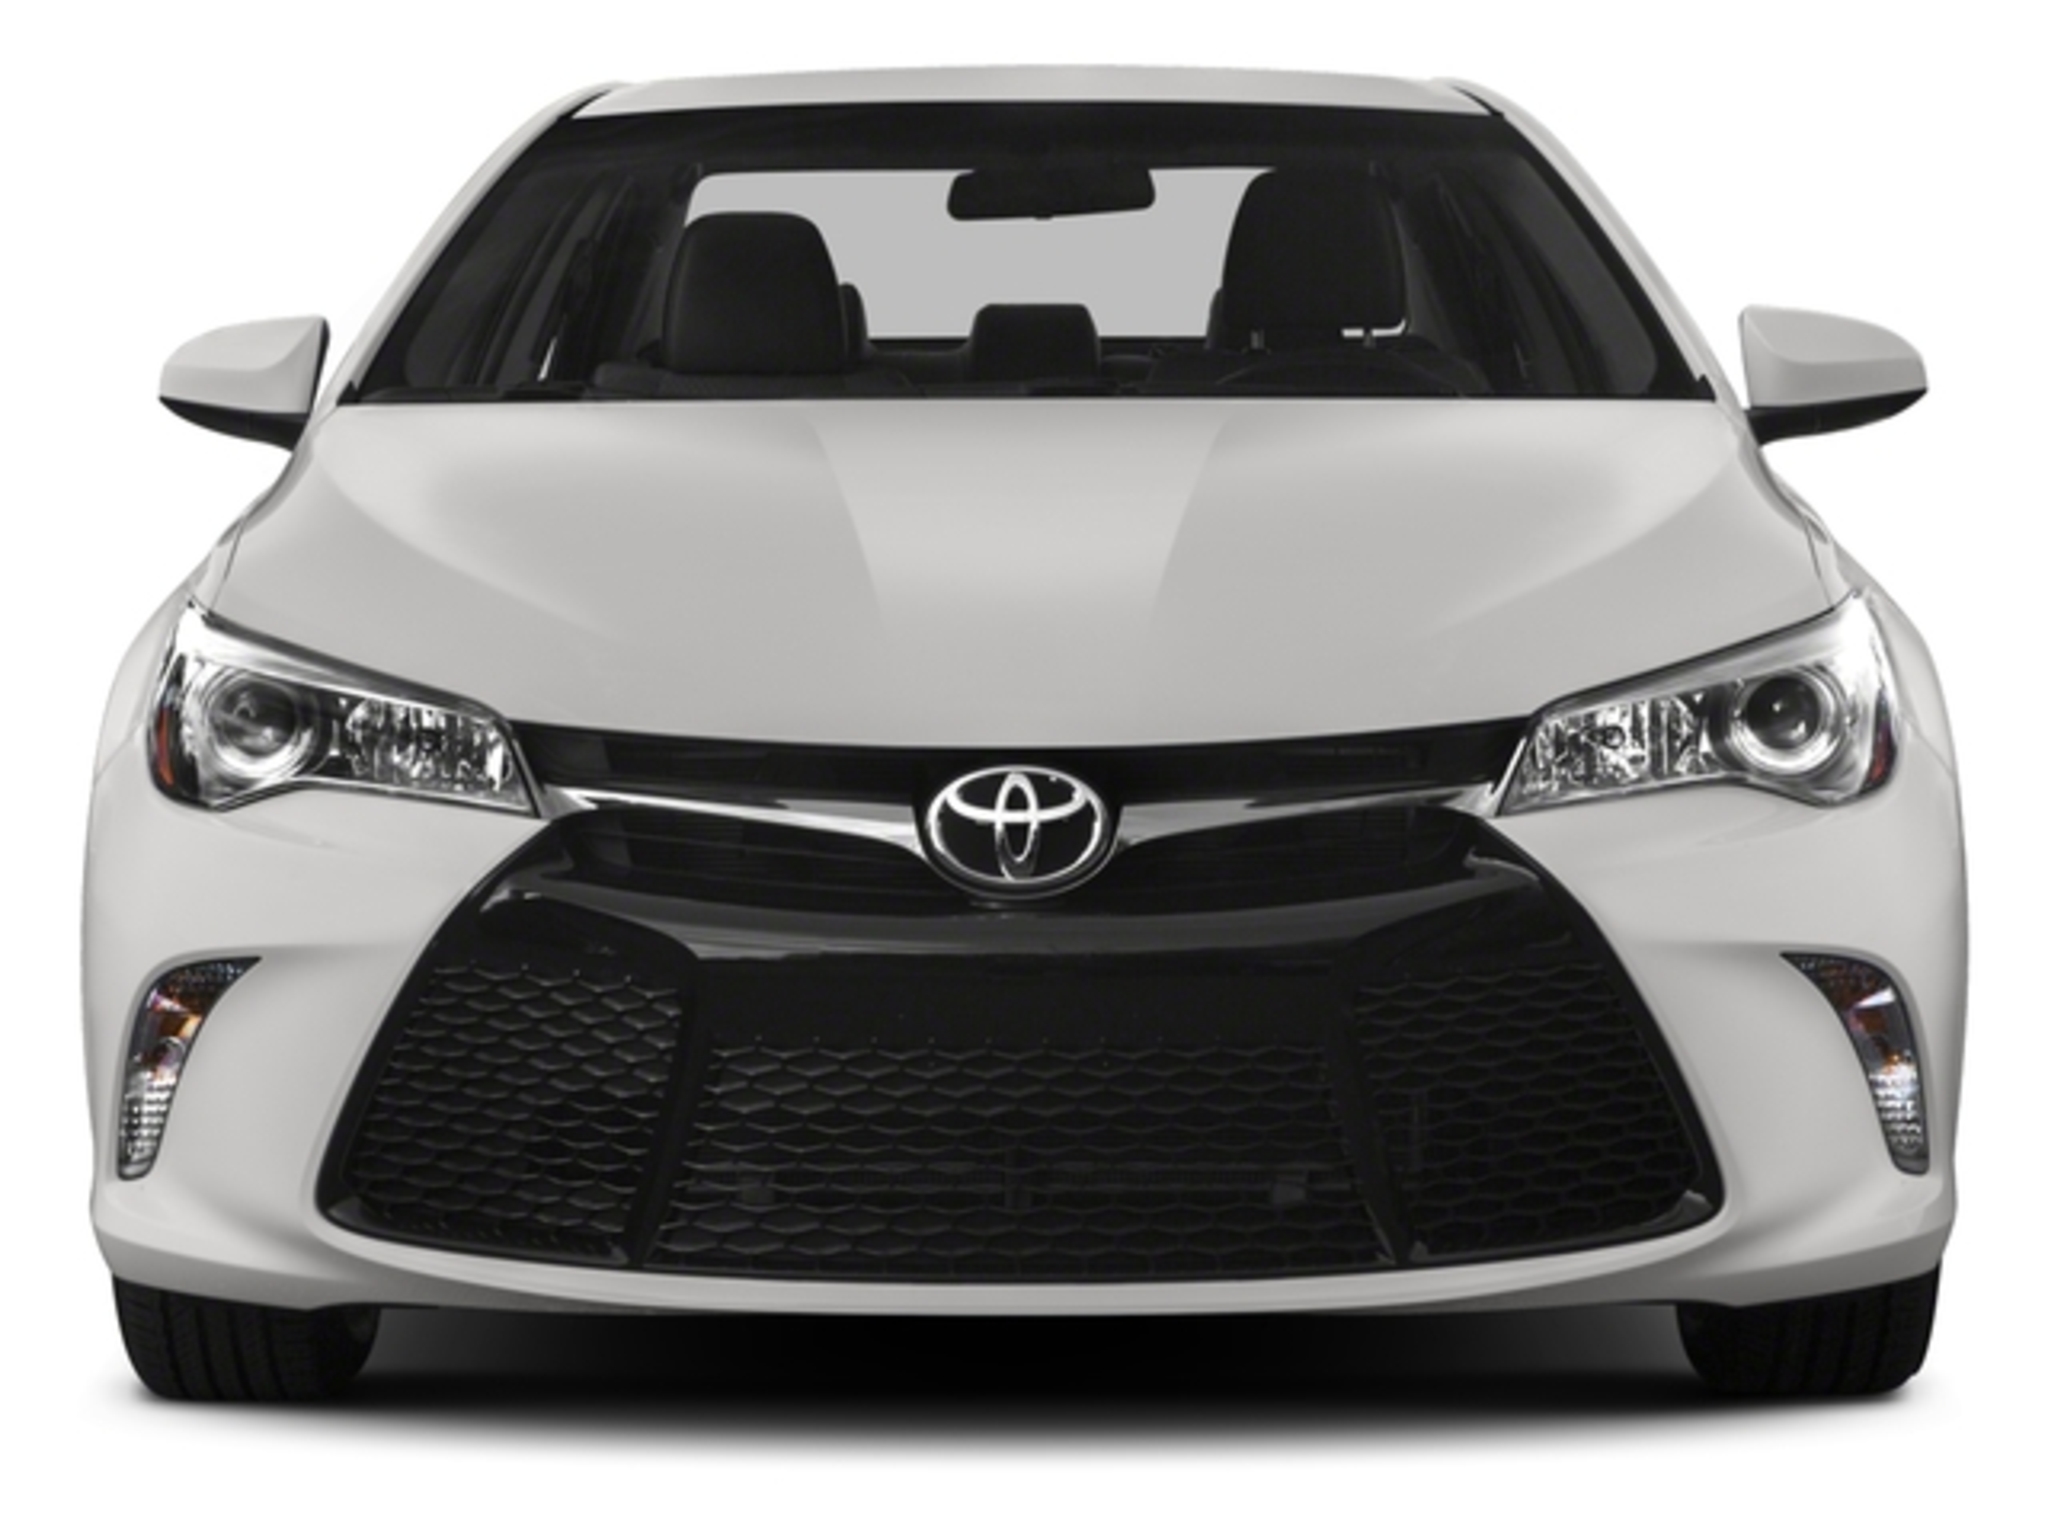 2015 Toyota Camry - Compare Prices, Trims, Options, Specs ...